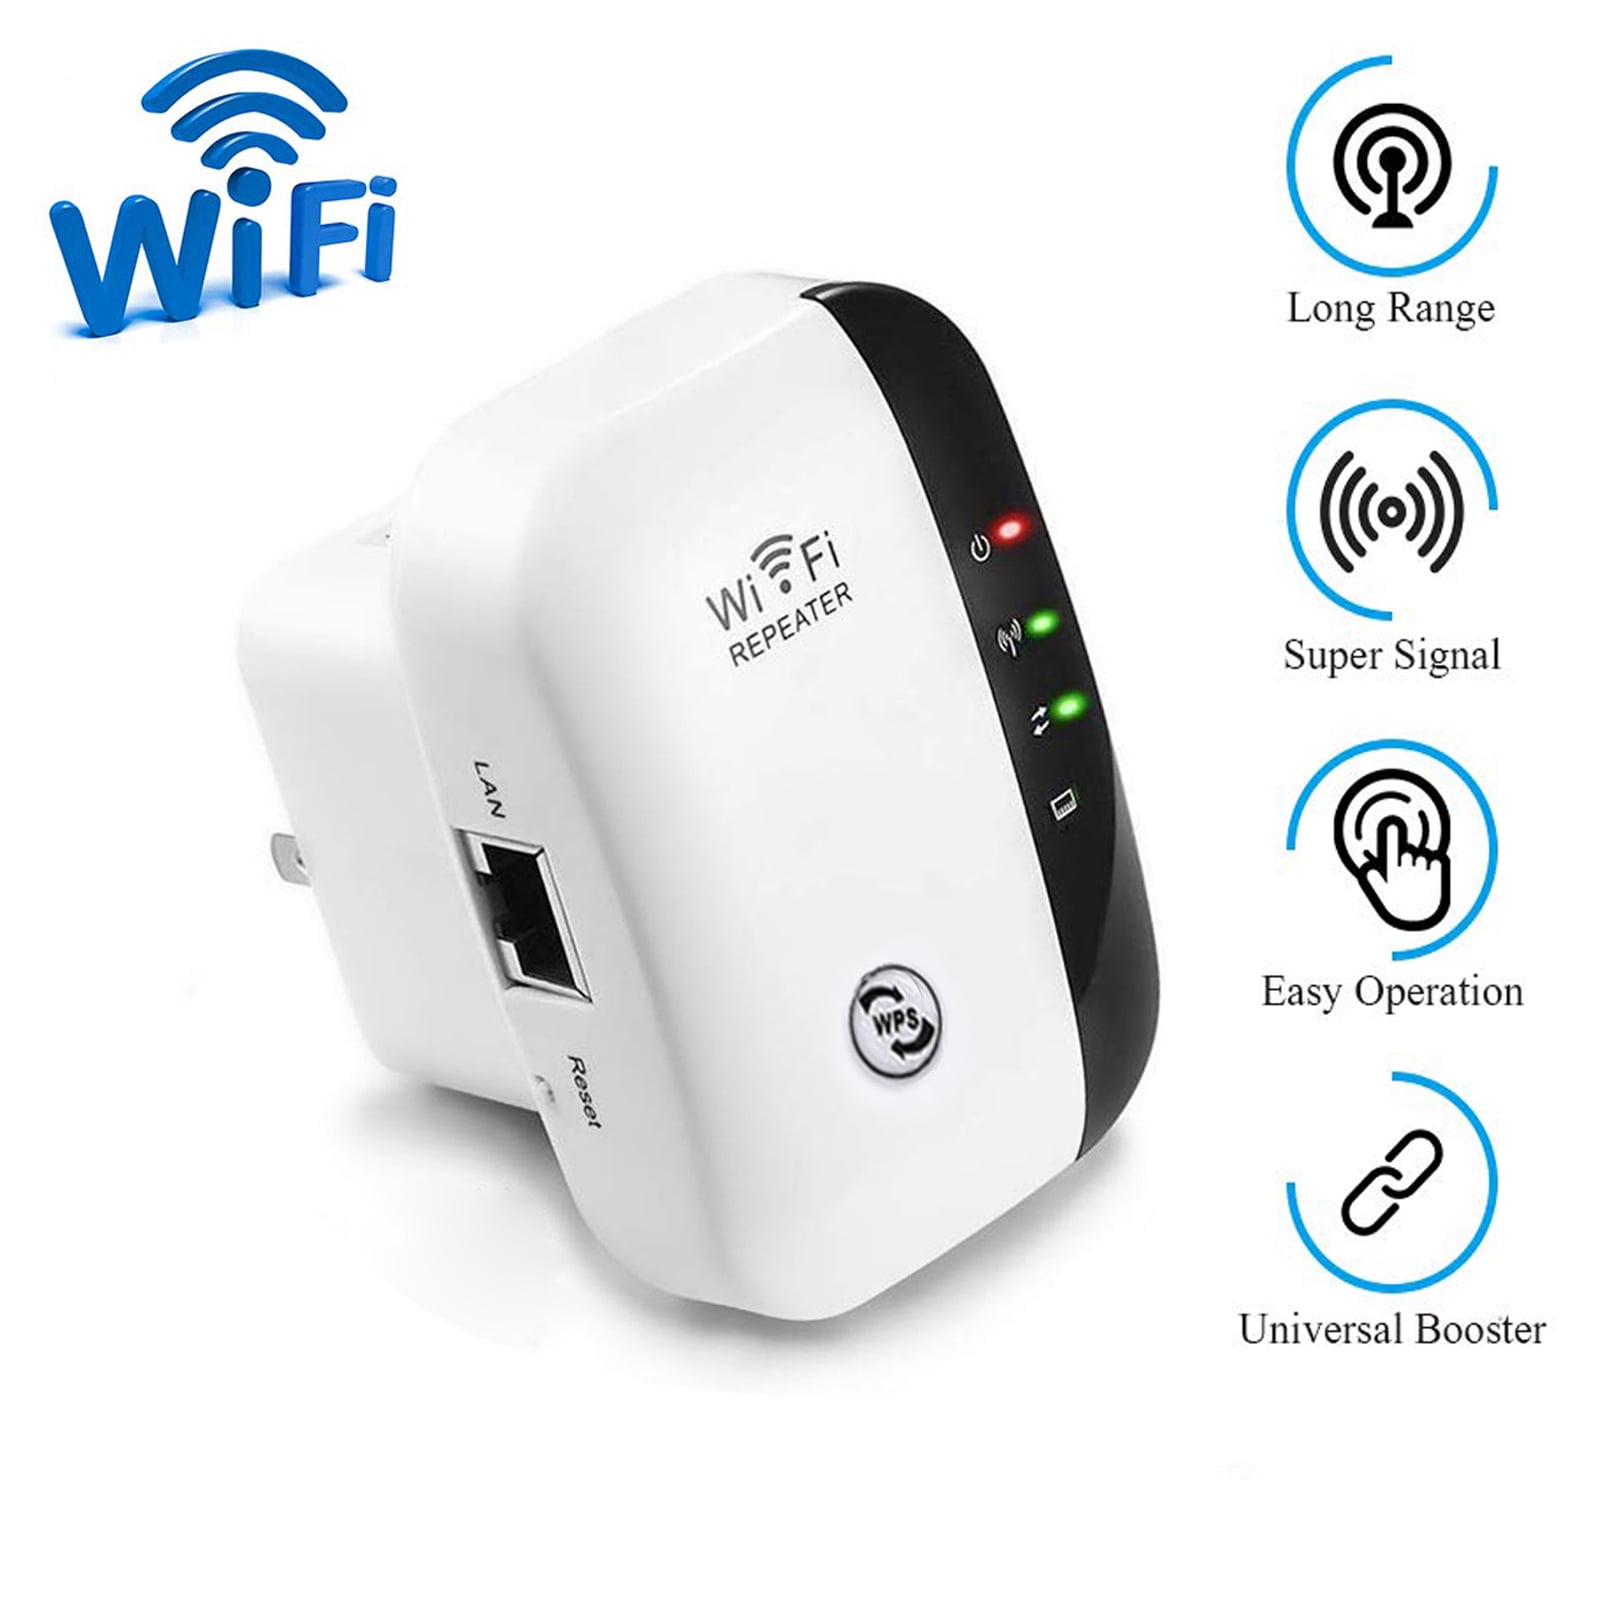 802.11b/g/n WiFi Repeater with 360 Degree Covering USMSRM US300 300Mbps Wireless-N WiFi Range Extender 